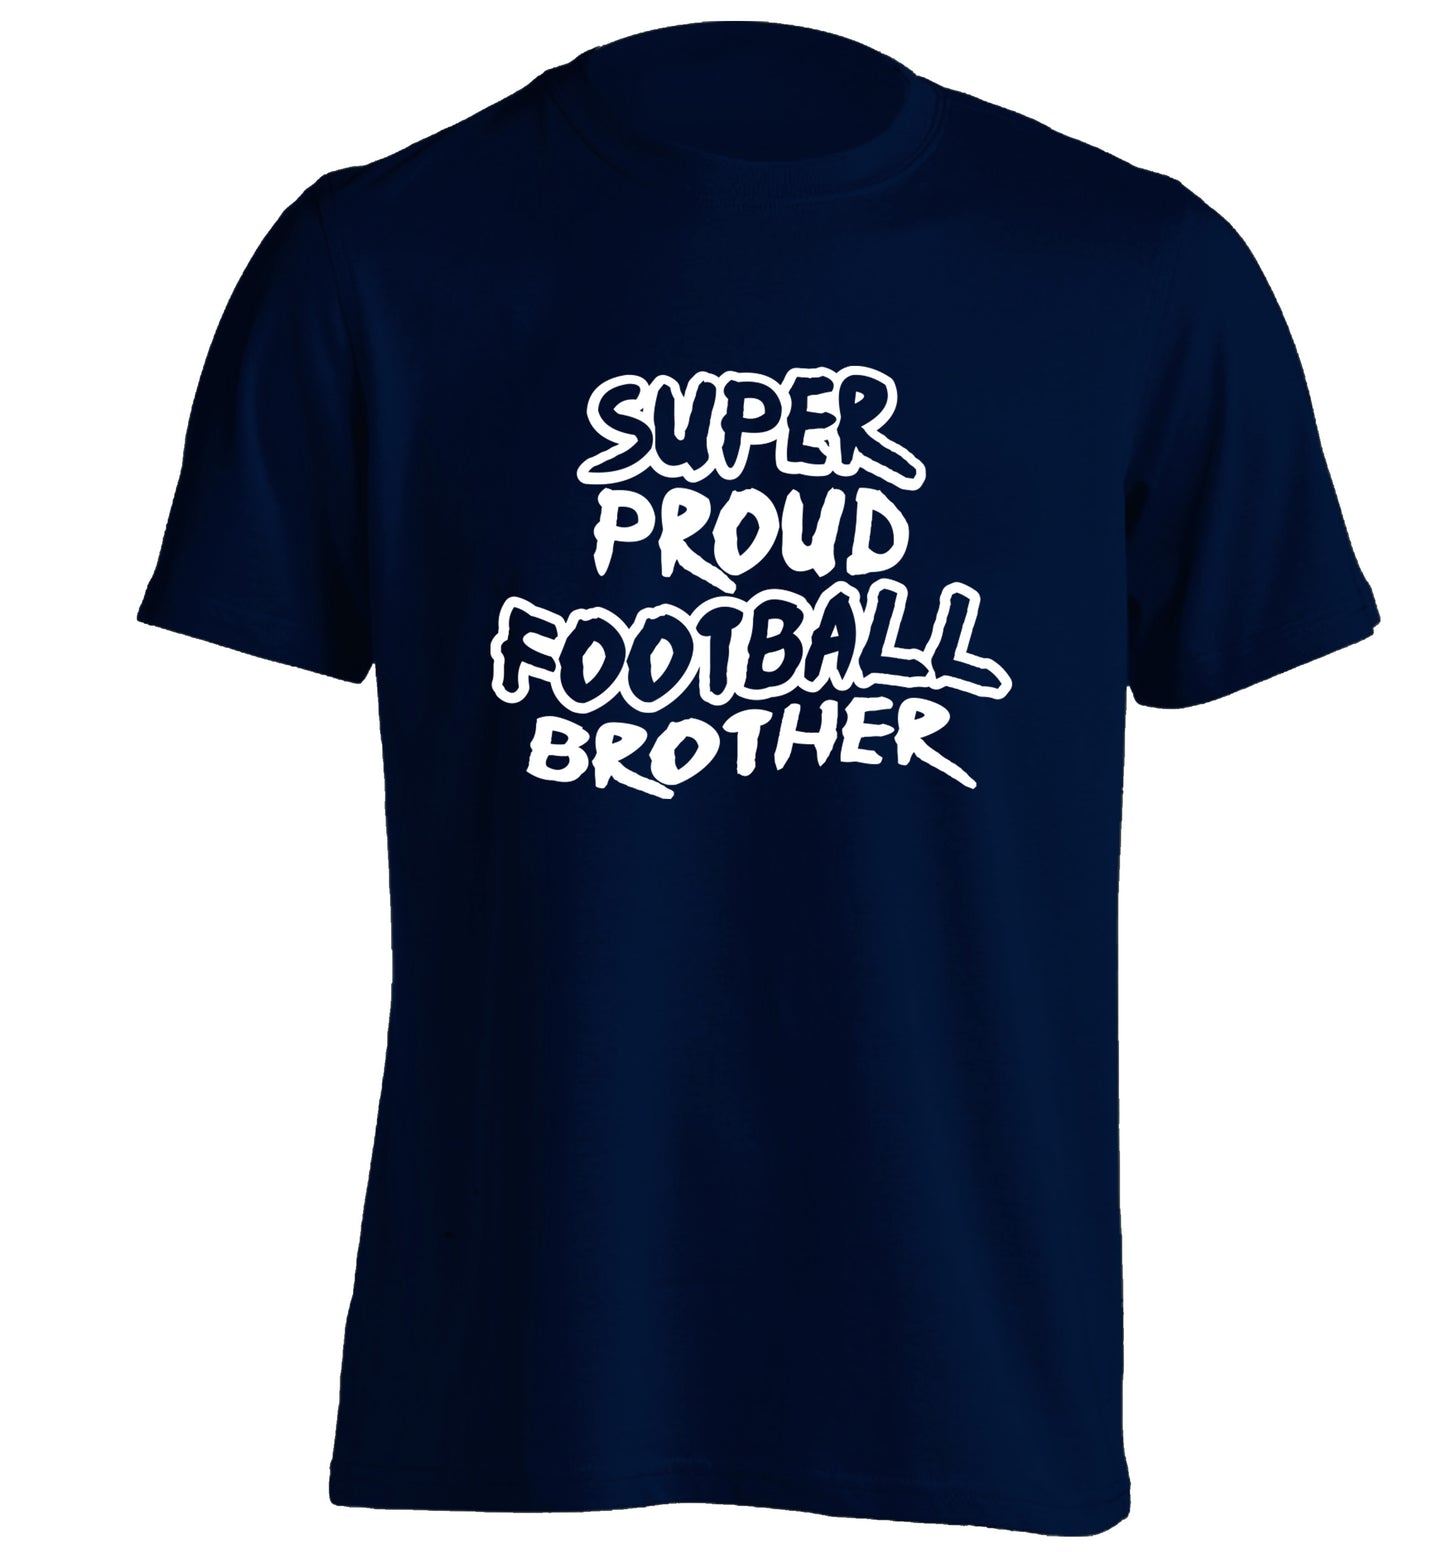 Super proud football brother adults unisexnavy Tshirt 2XL